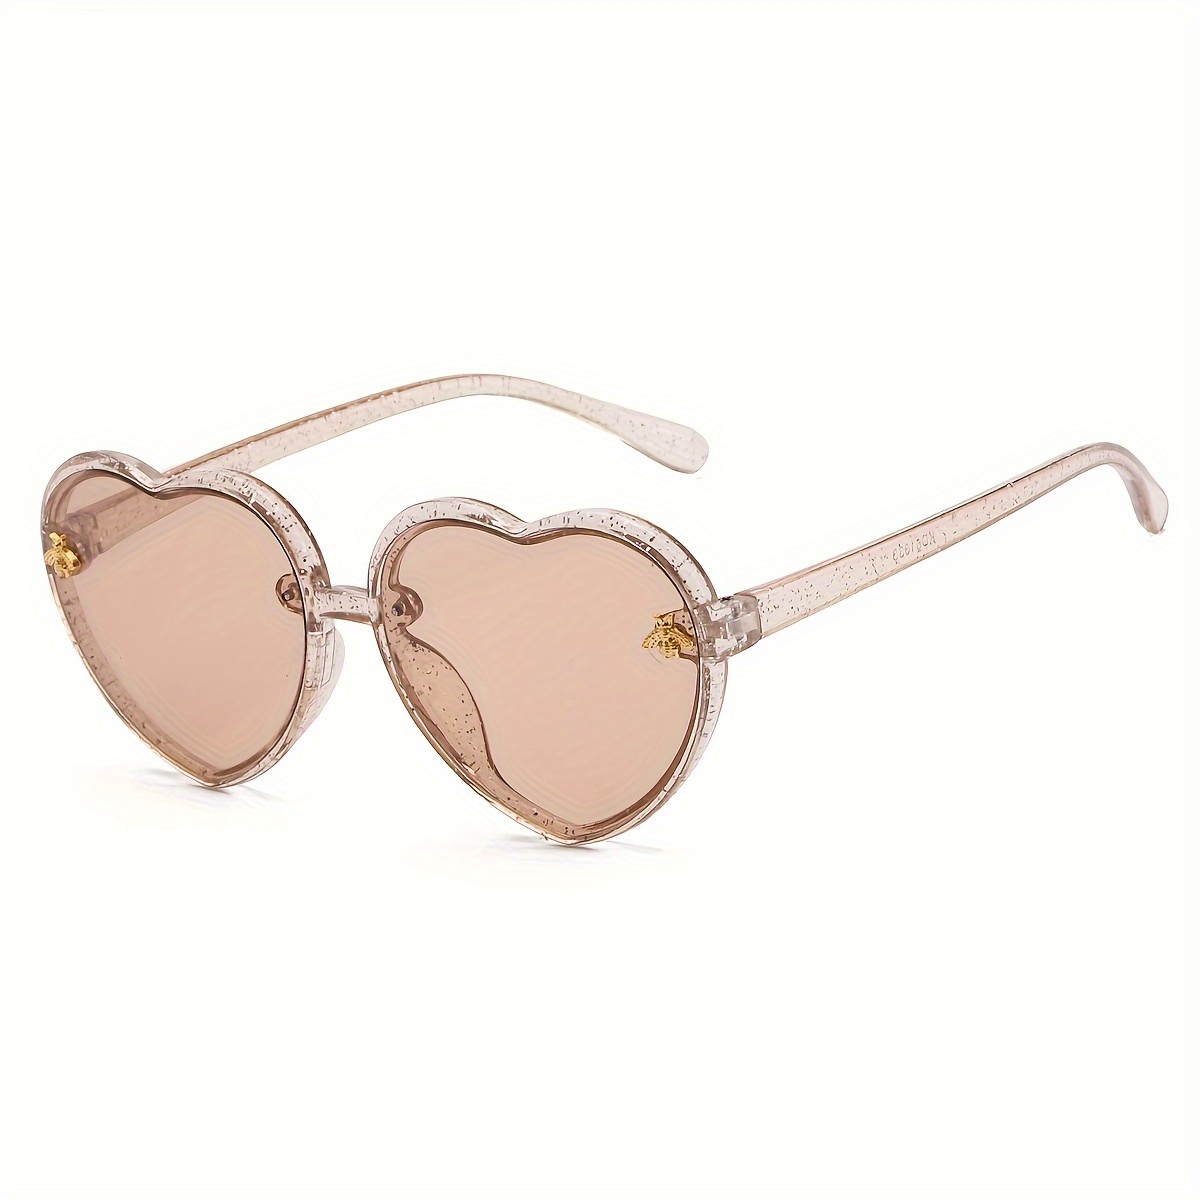 Adorable Trendy Cool Rimless Love Heart Shape Frame Sunglasses, for Teens Boys Girls Outdoor Party Vacation Travel Decors Photo Props, 4 Colors